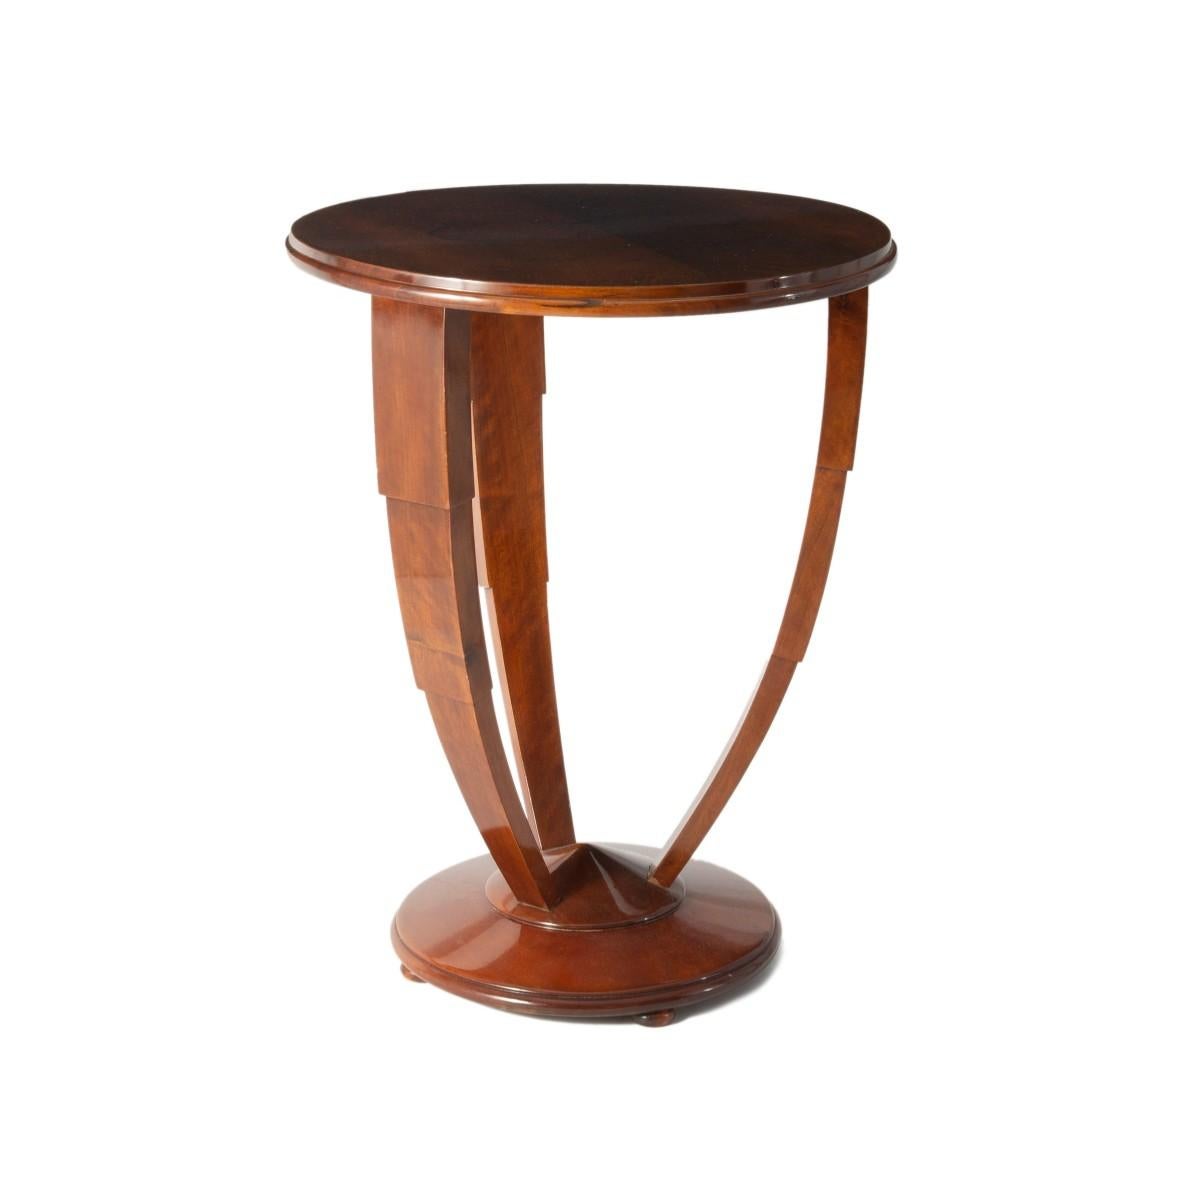 Mid-20th Century French Art Deco Tri-Form Base Side Table